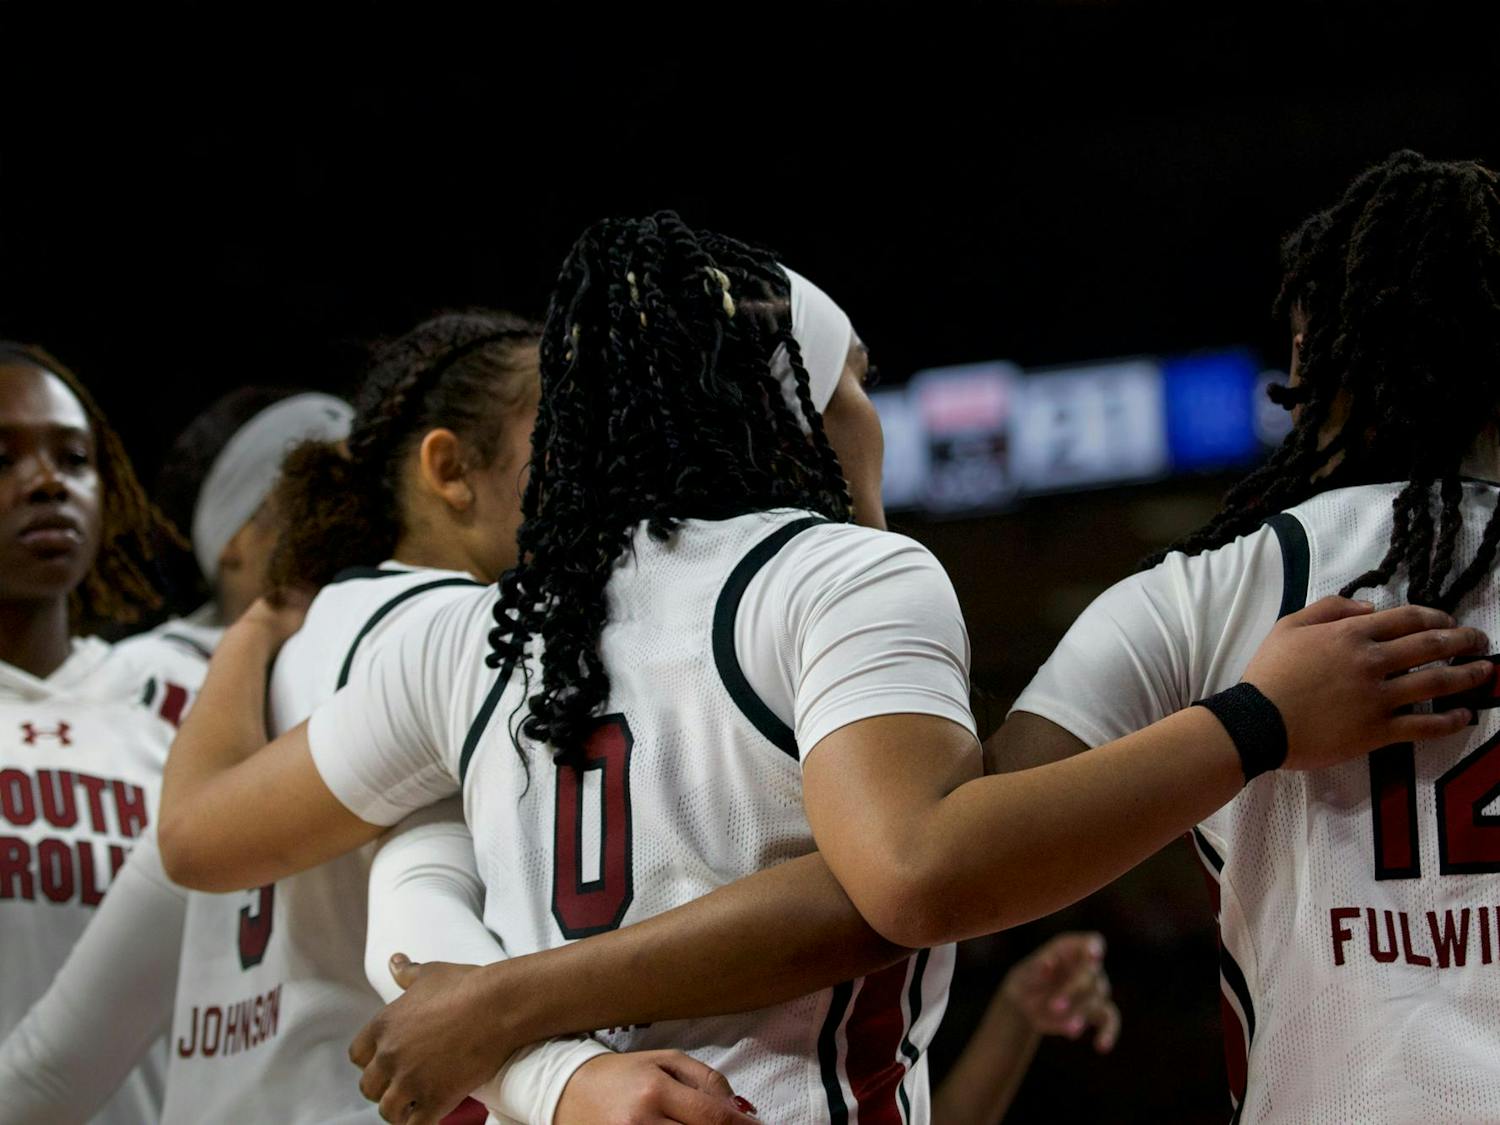 Freshman guard Tessa Johnson, senior guard Te-Hina Paopao and freshman guard MiLaysia Fulwiley huddle together during a timeout against the Kentucky Wildcats. The trio contributed 39 points during South Carolina’s 98-36 victory over Kentucky on Jan. 15, 2023.